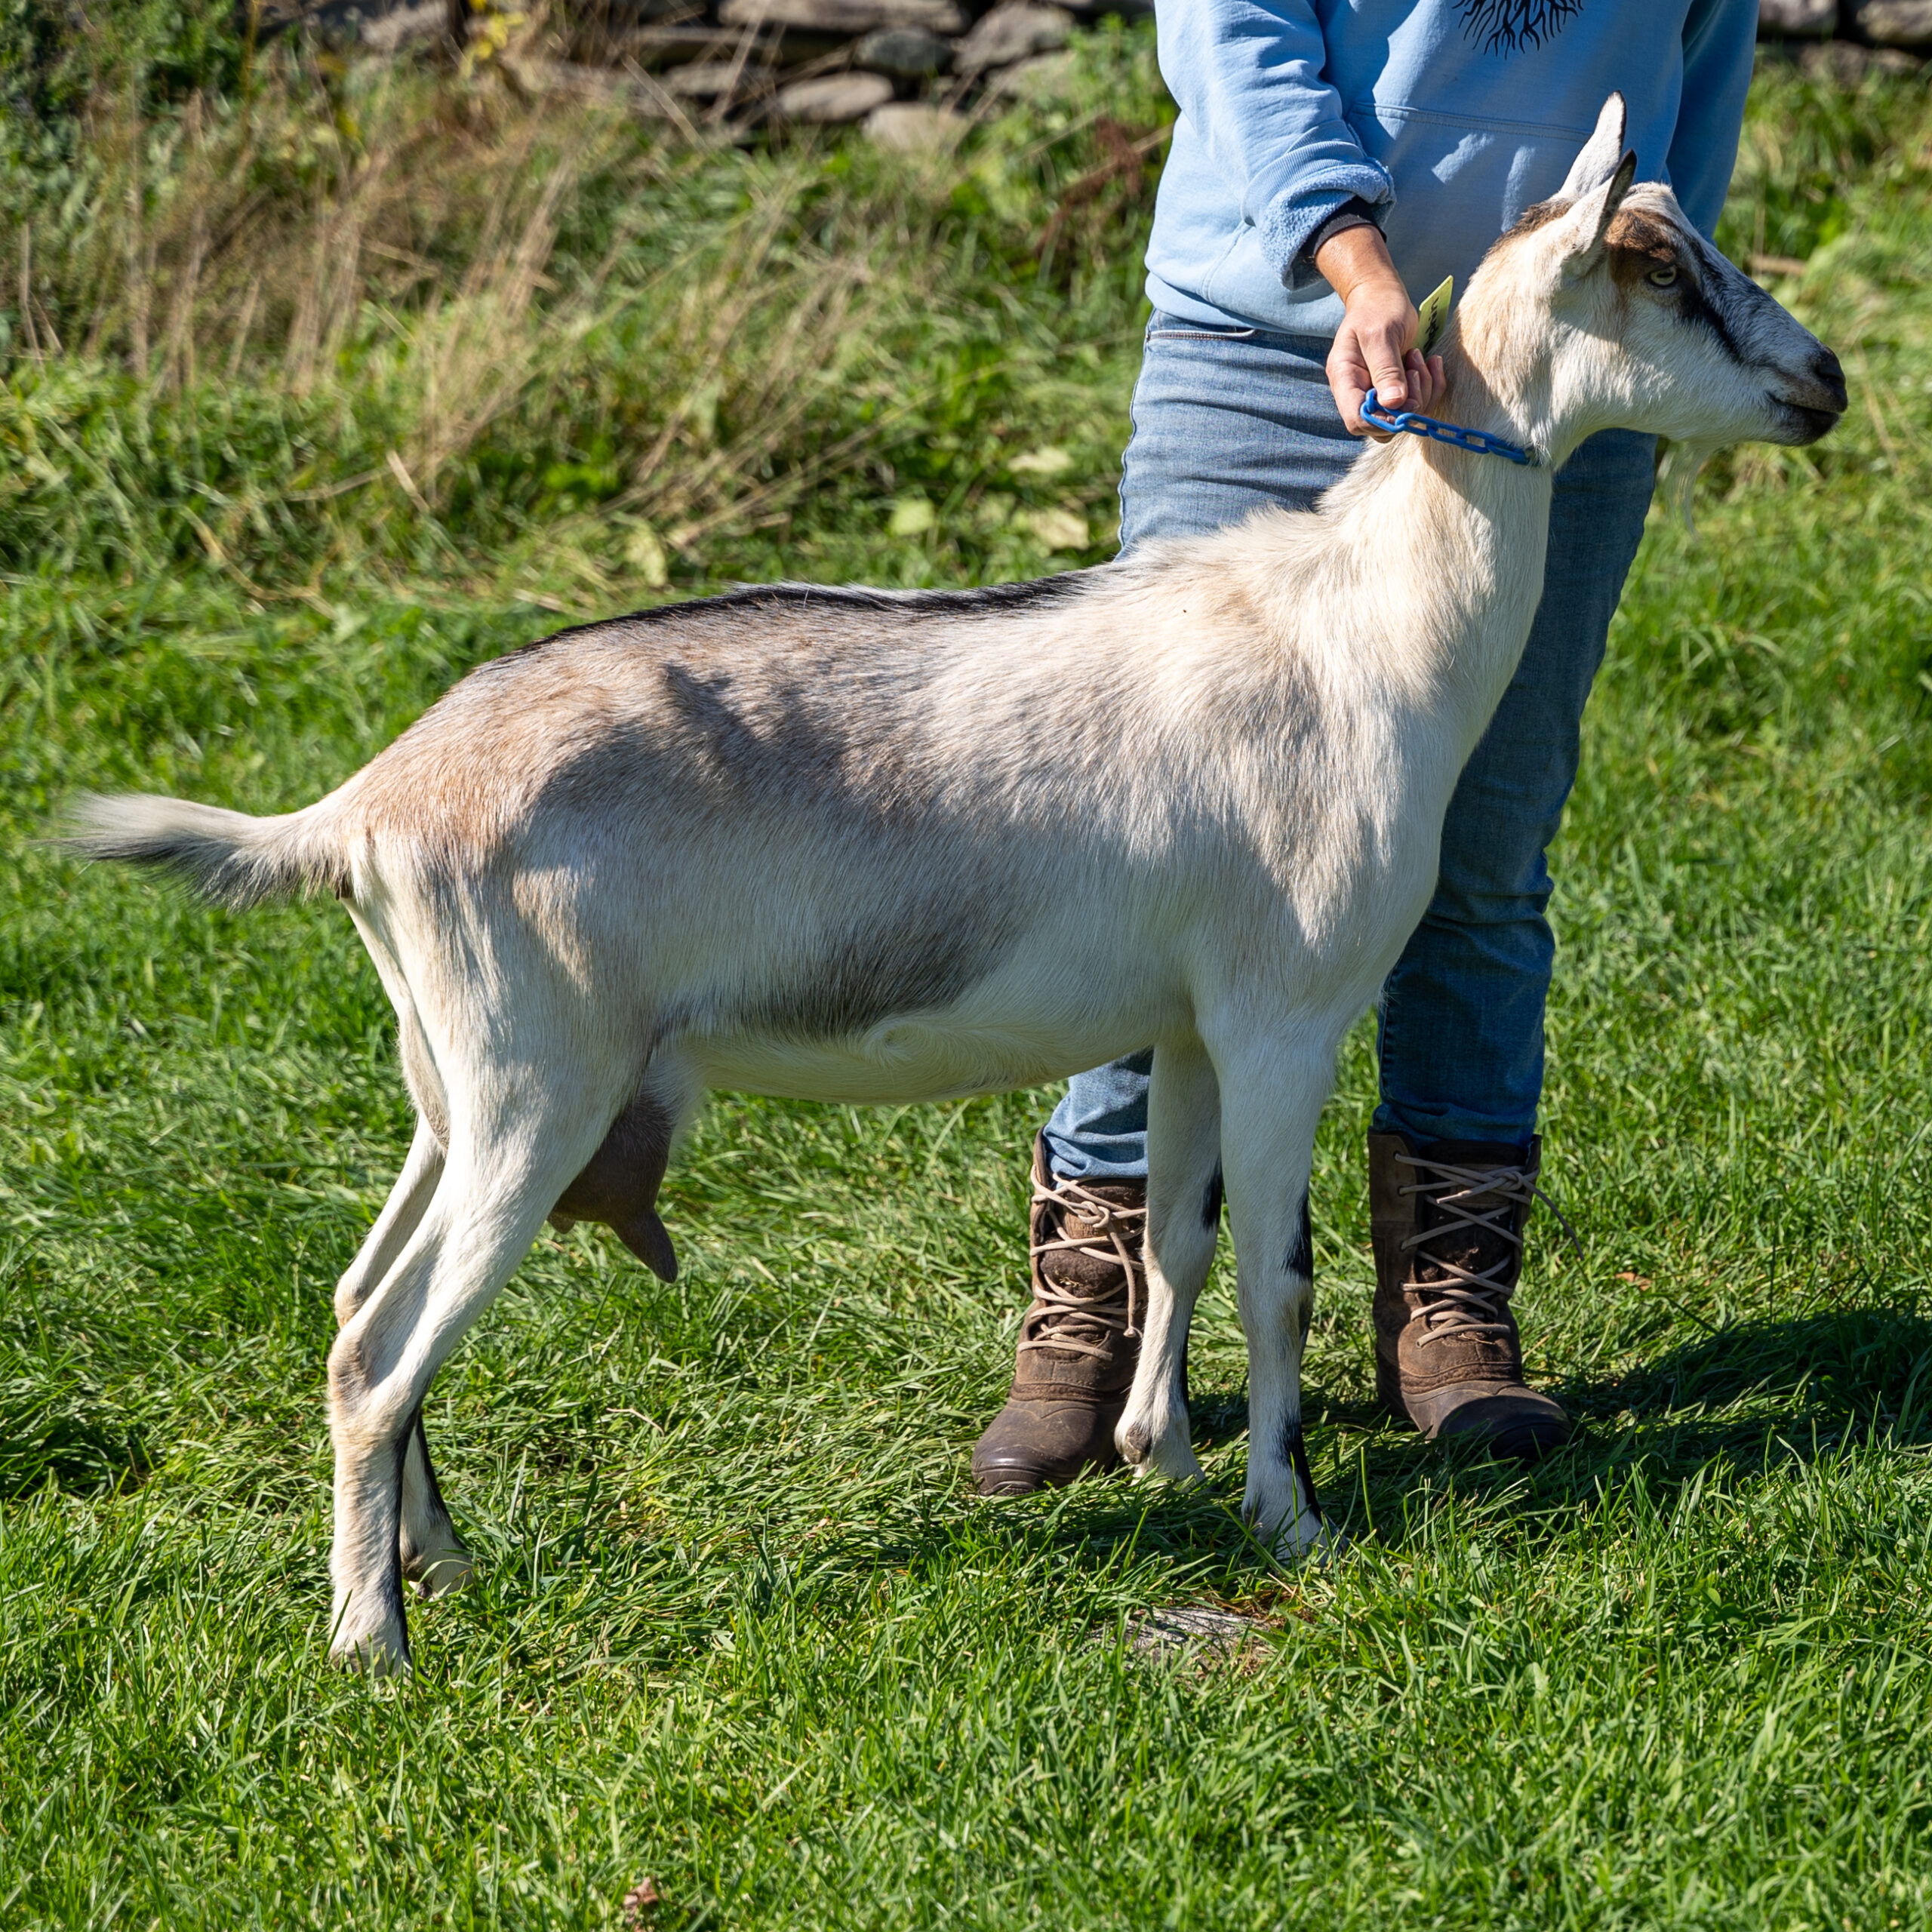 White goat on green grass being held by a farmer with a blue sweatshirt and jeans in Somerville, Maine.